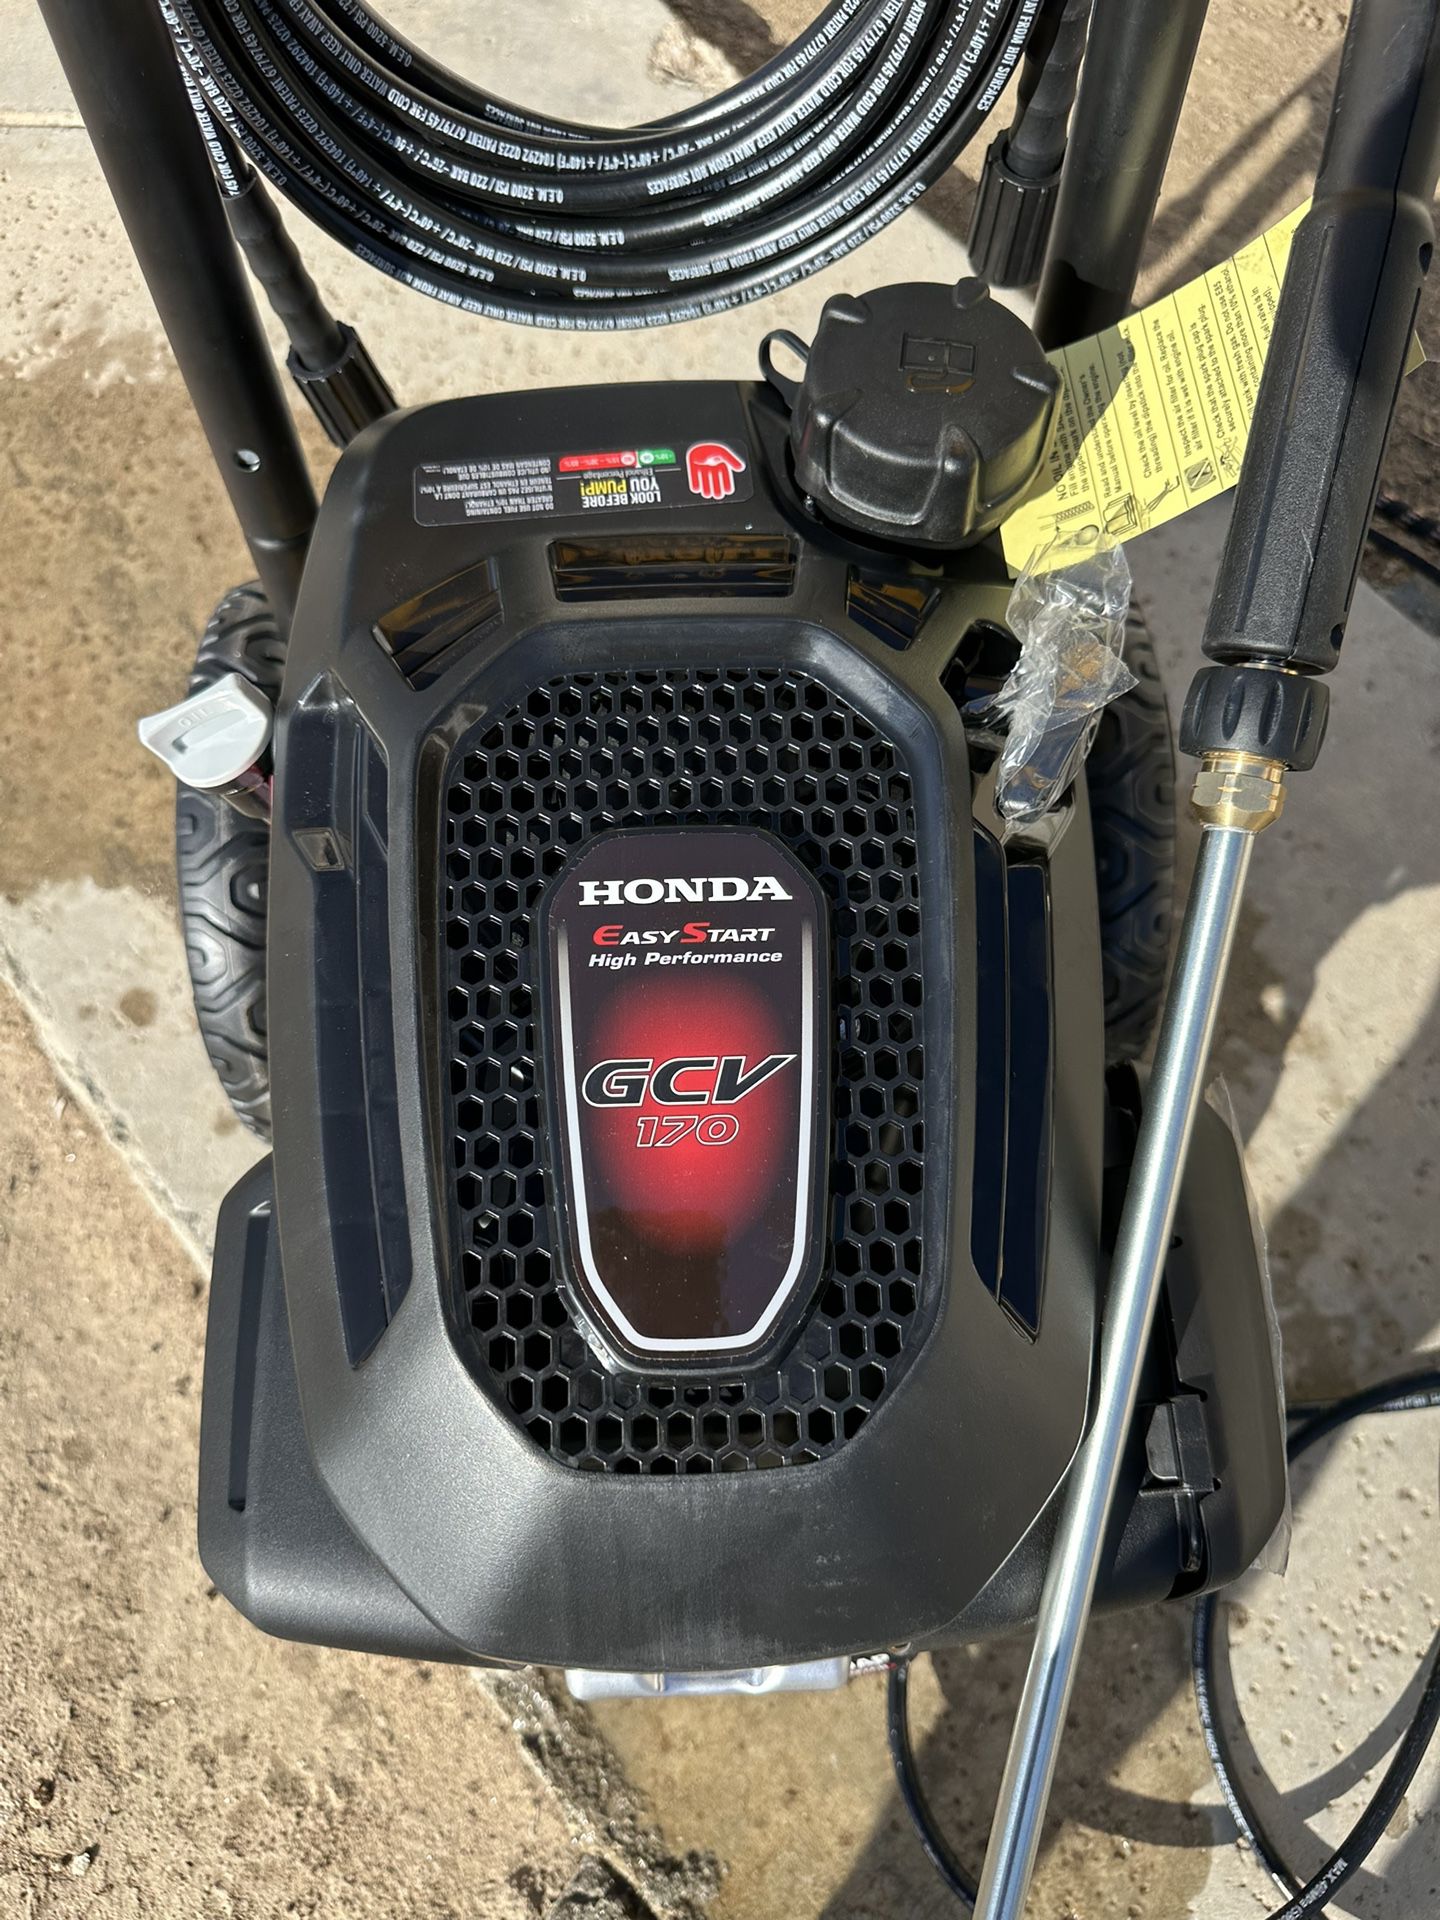 New Dewalt 3100psi Gas Pressure Washer. Honda Motor. Try Before You Buy. Pick Up Only.